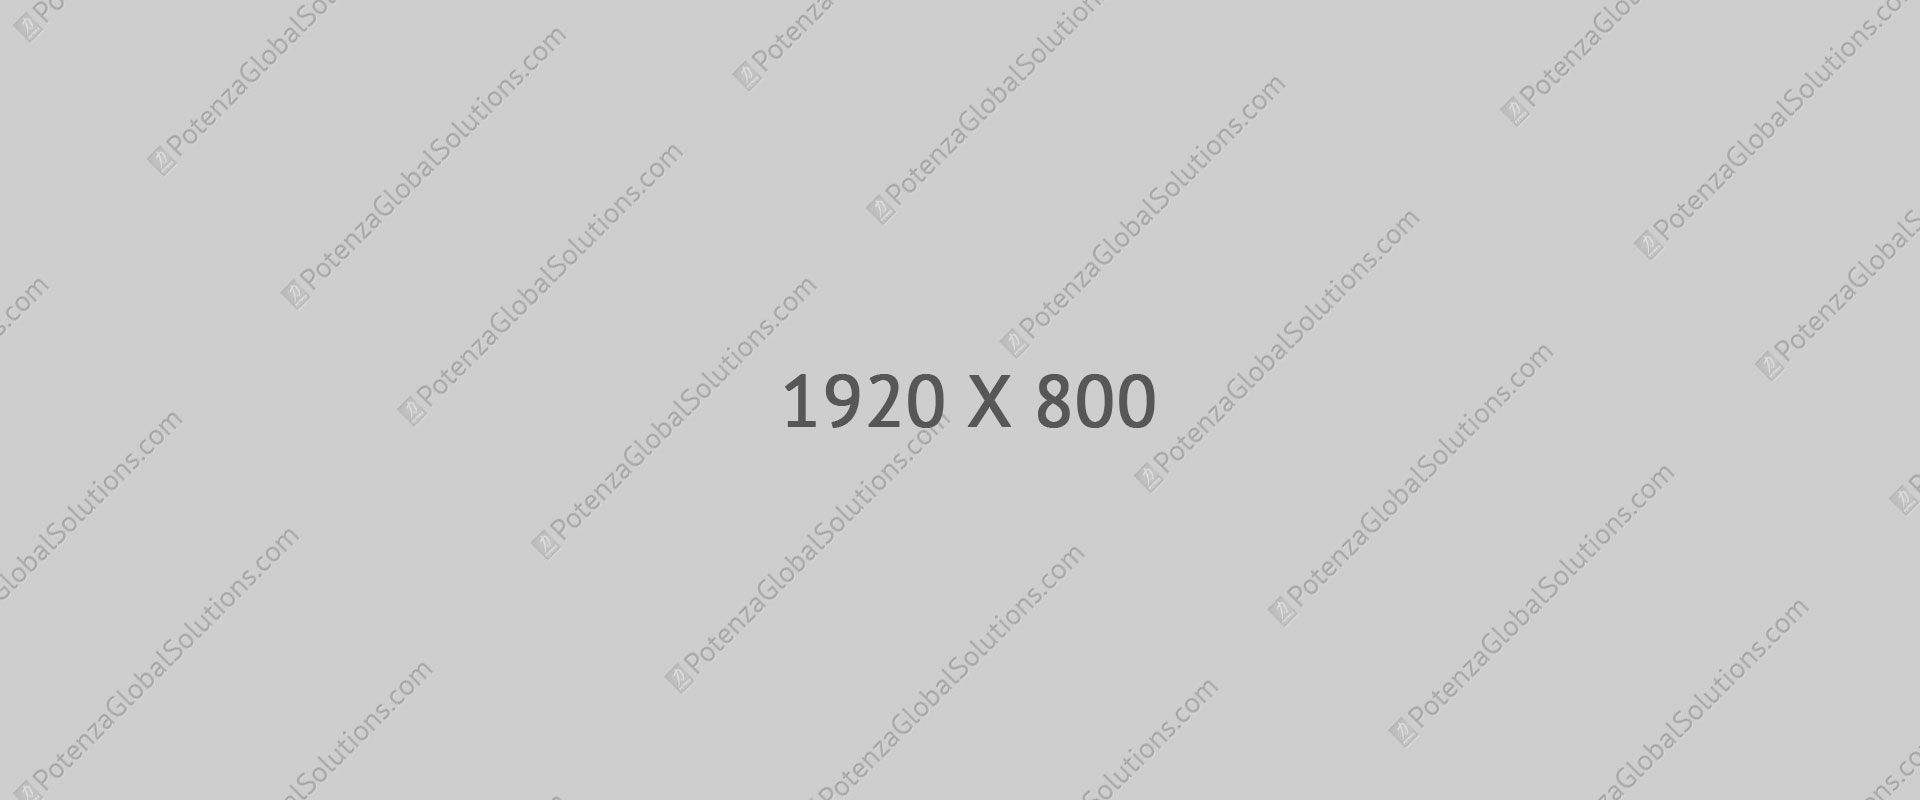 White placeholder image with dimensions marked as "1920 x 800" in black text, centered on a light gray background.